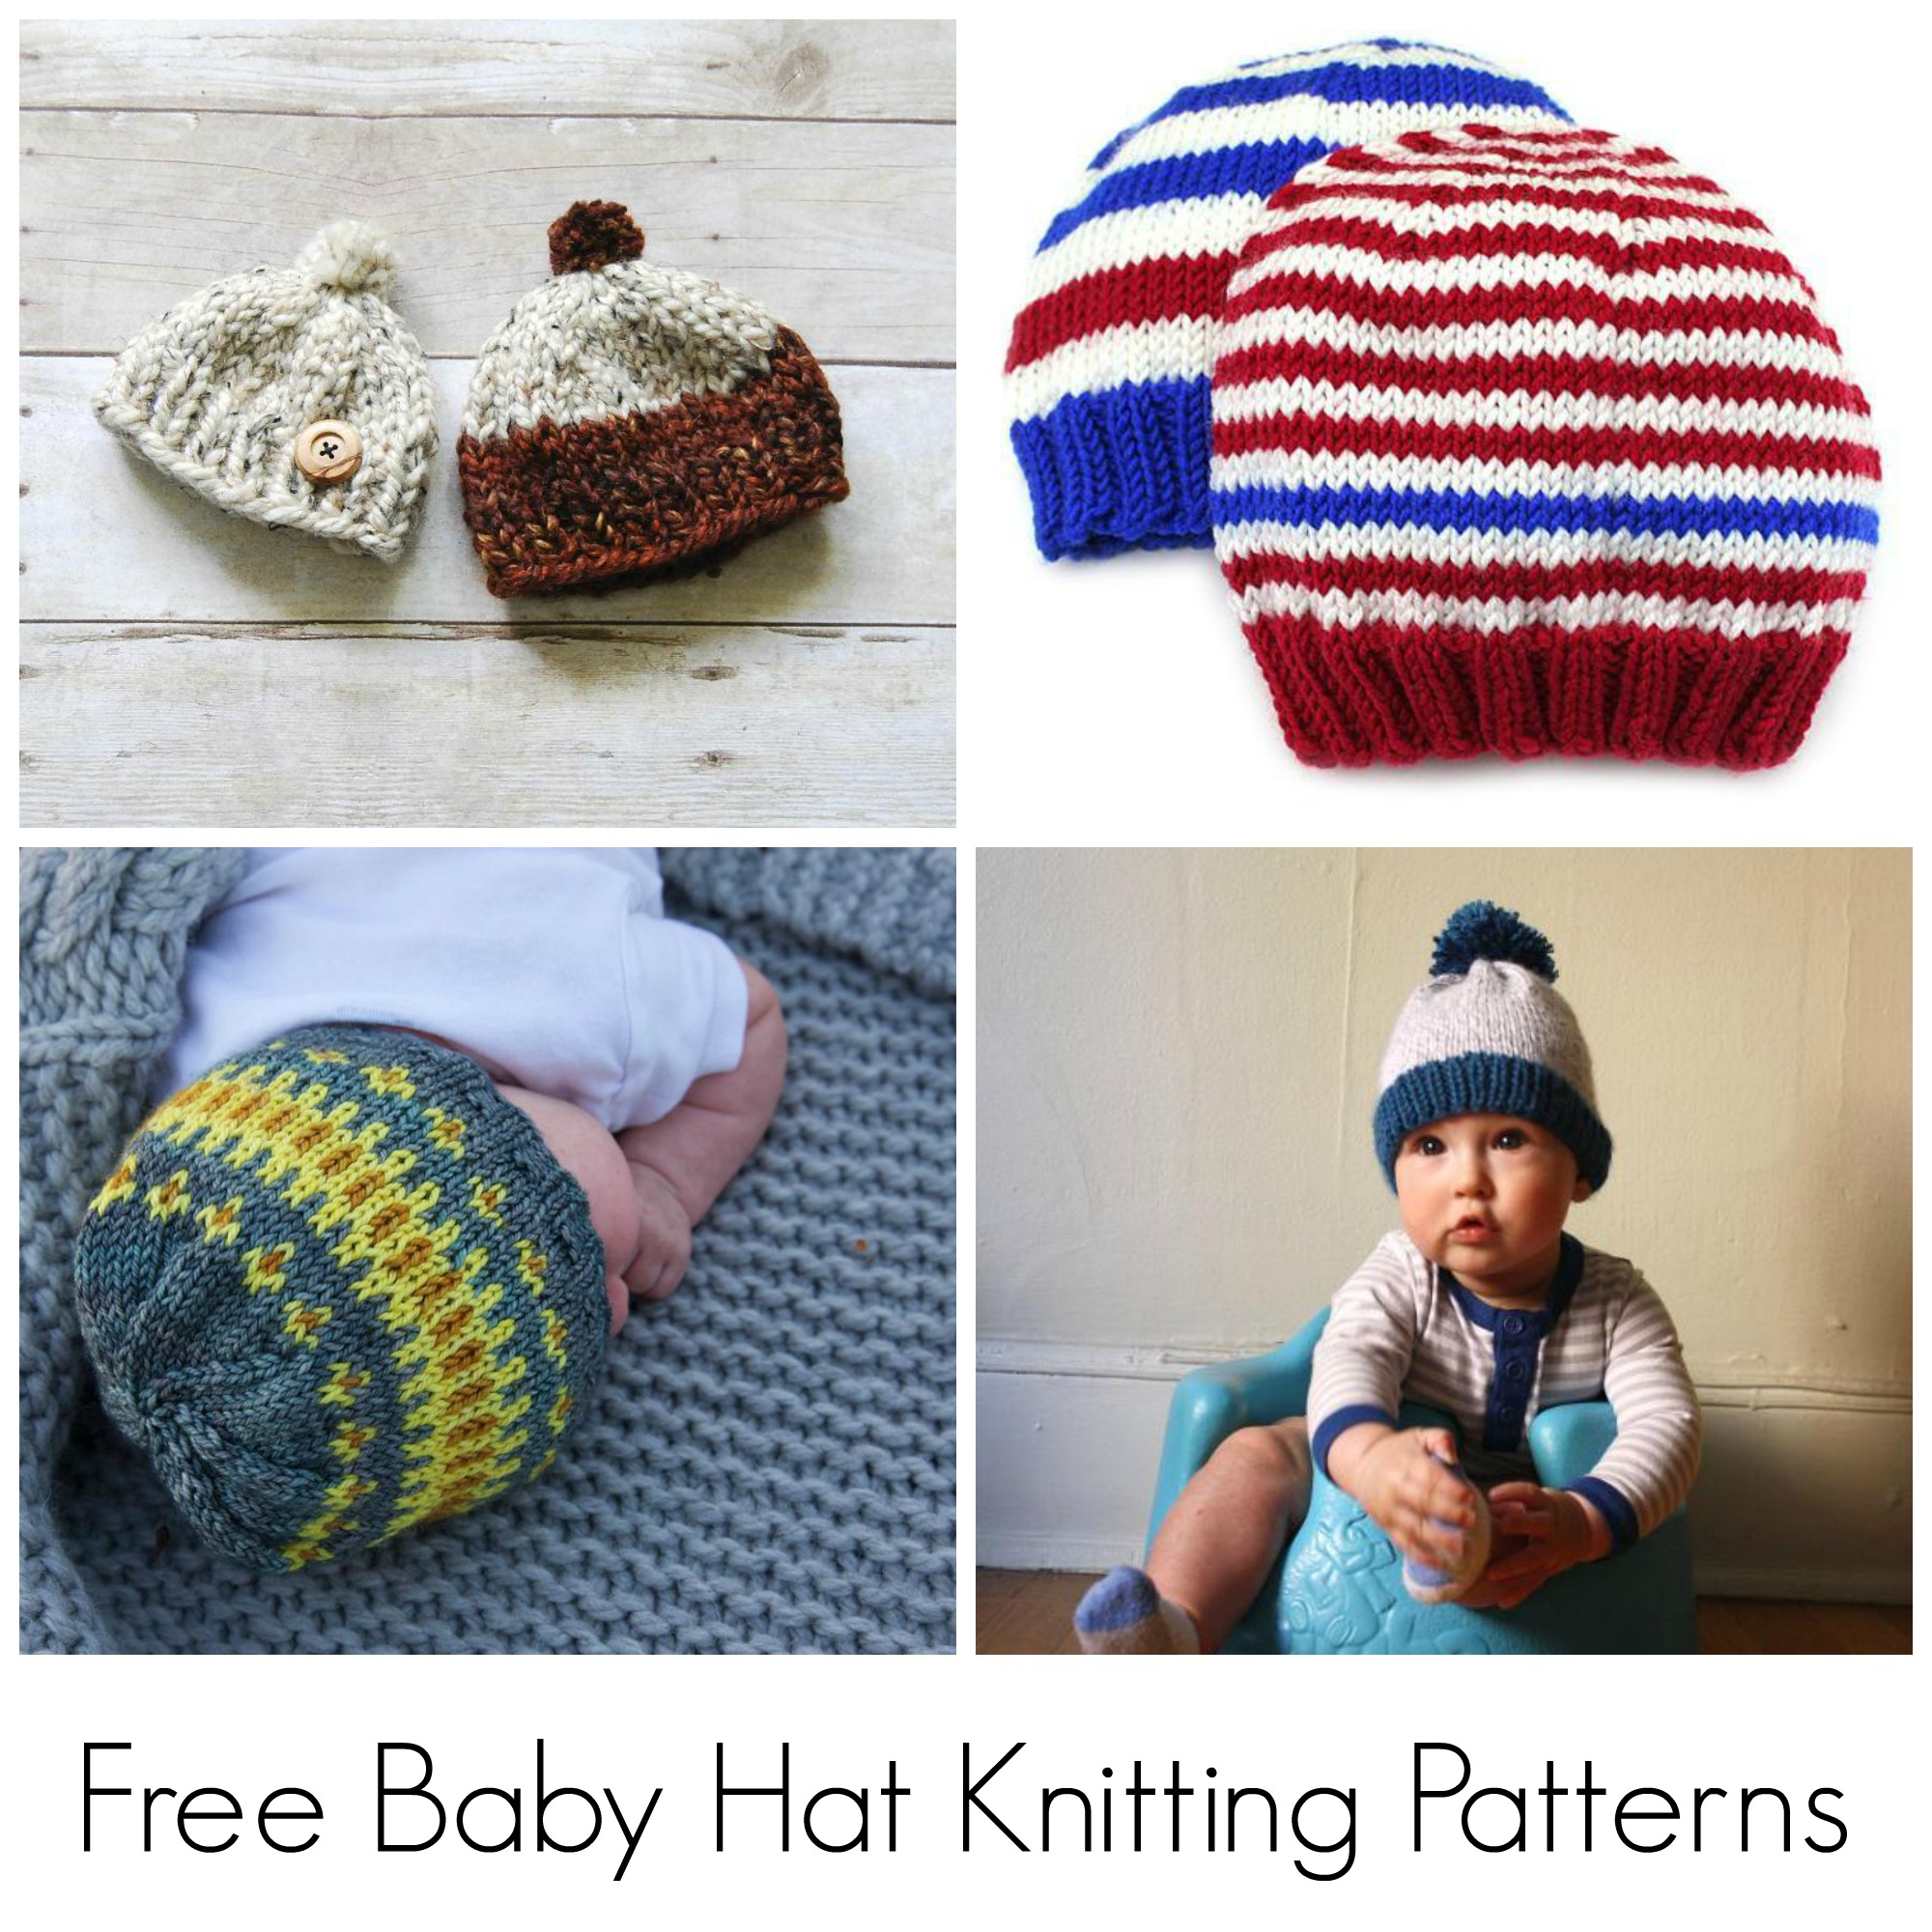 Knitted Baby Beanie Pattern 10 Free Knitting Patterns For Ba Hats On Craftsy